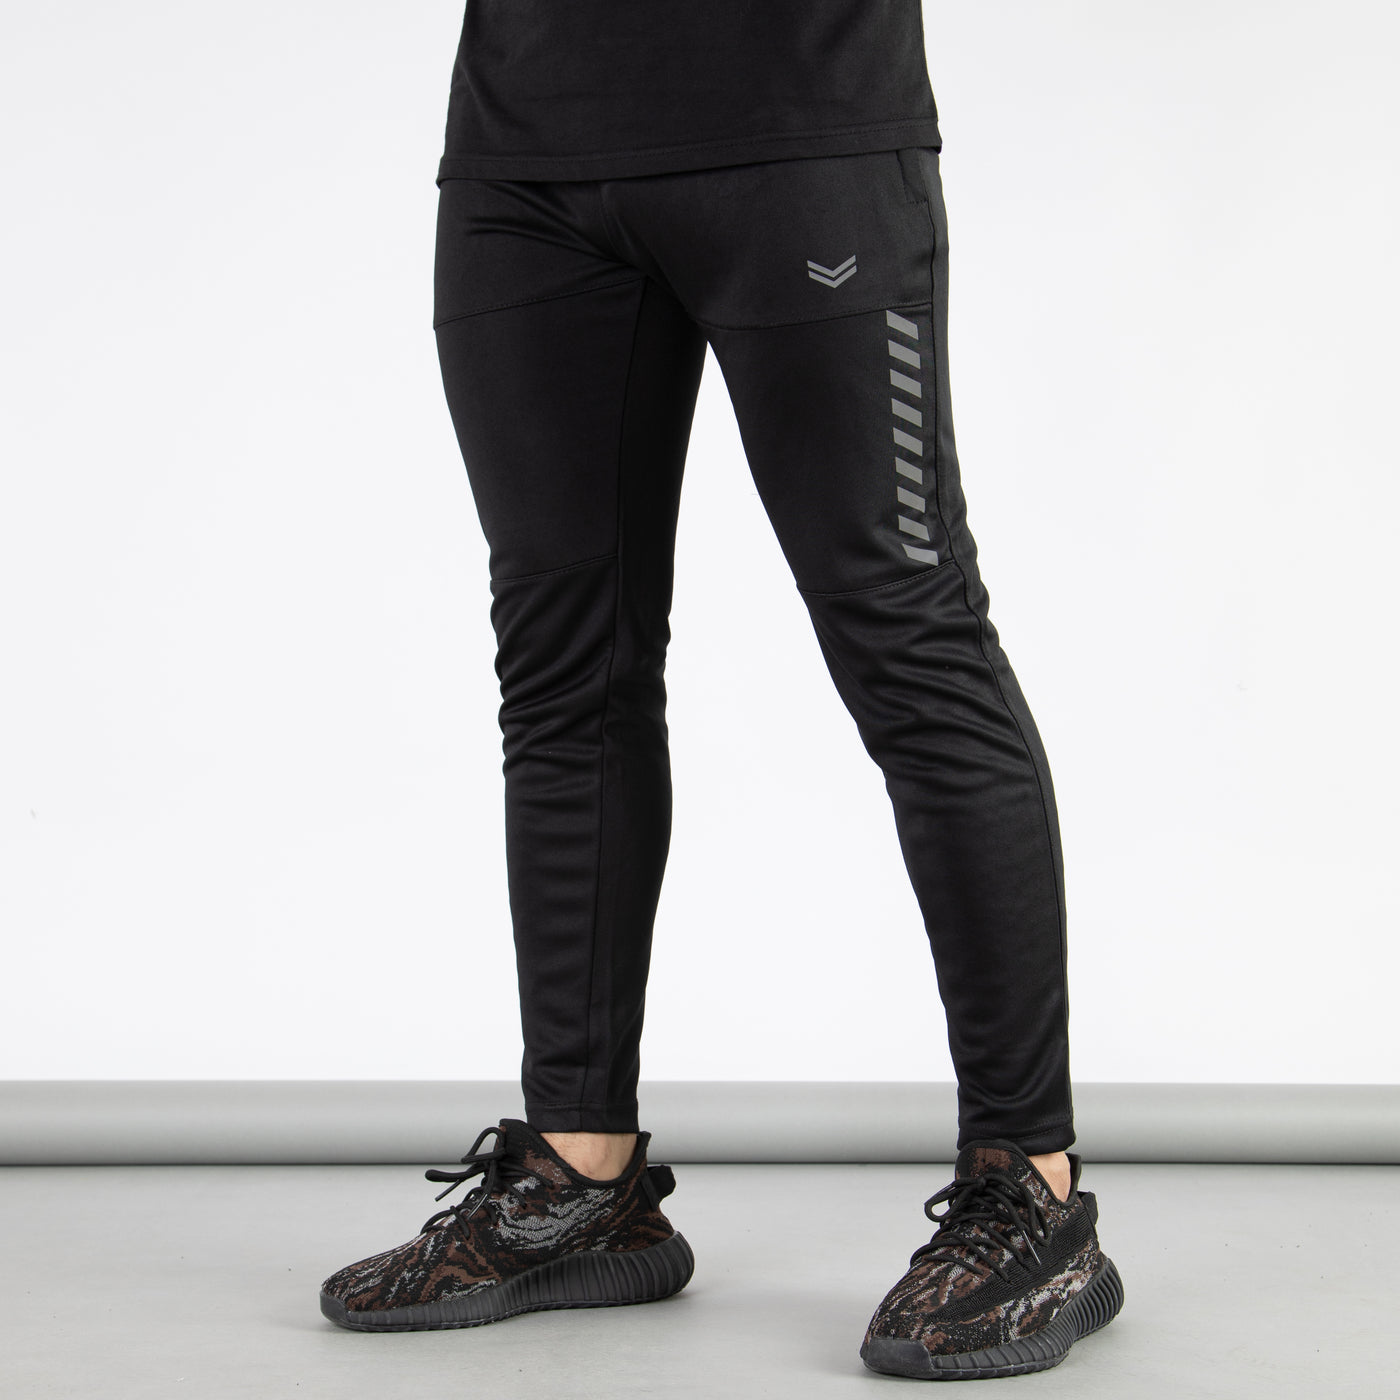 Black Front Paneled Quick Dry Bottoms with Striped Reflectors